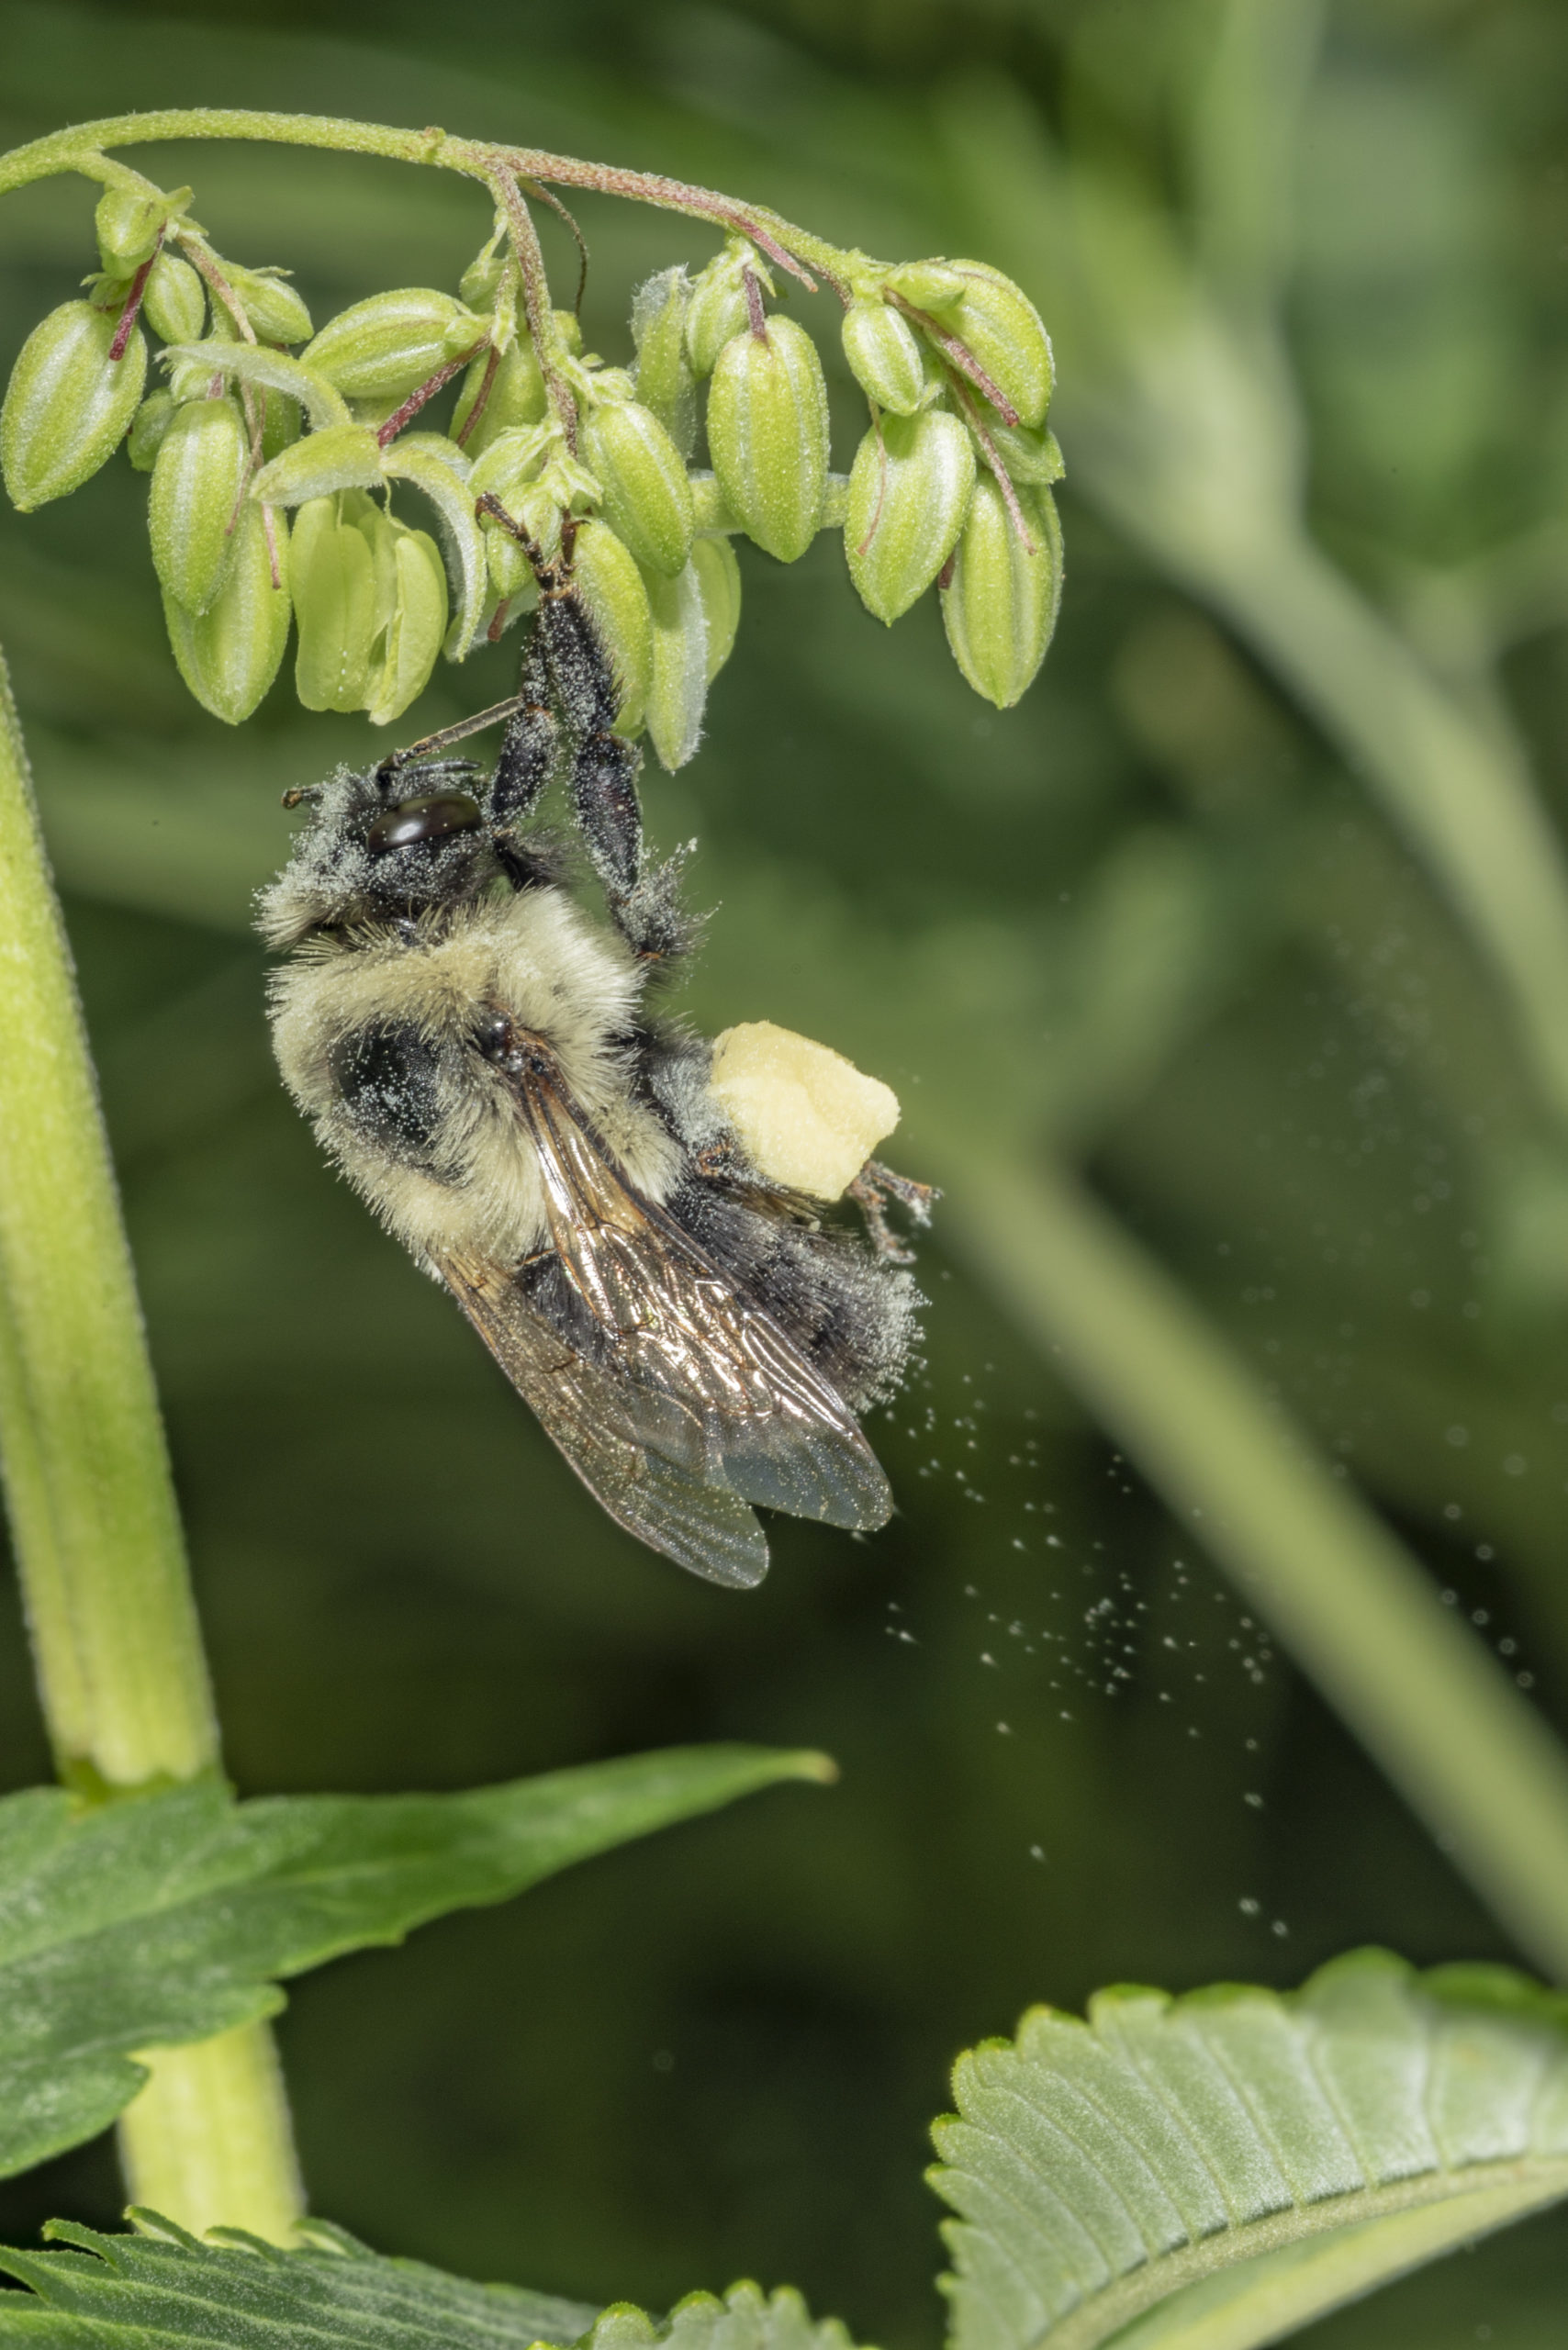 Image of a bumble bee working on pollen on hemp plant's flowers